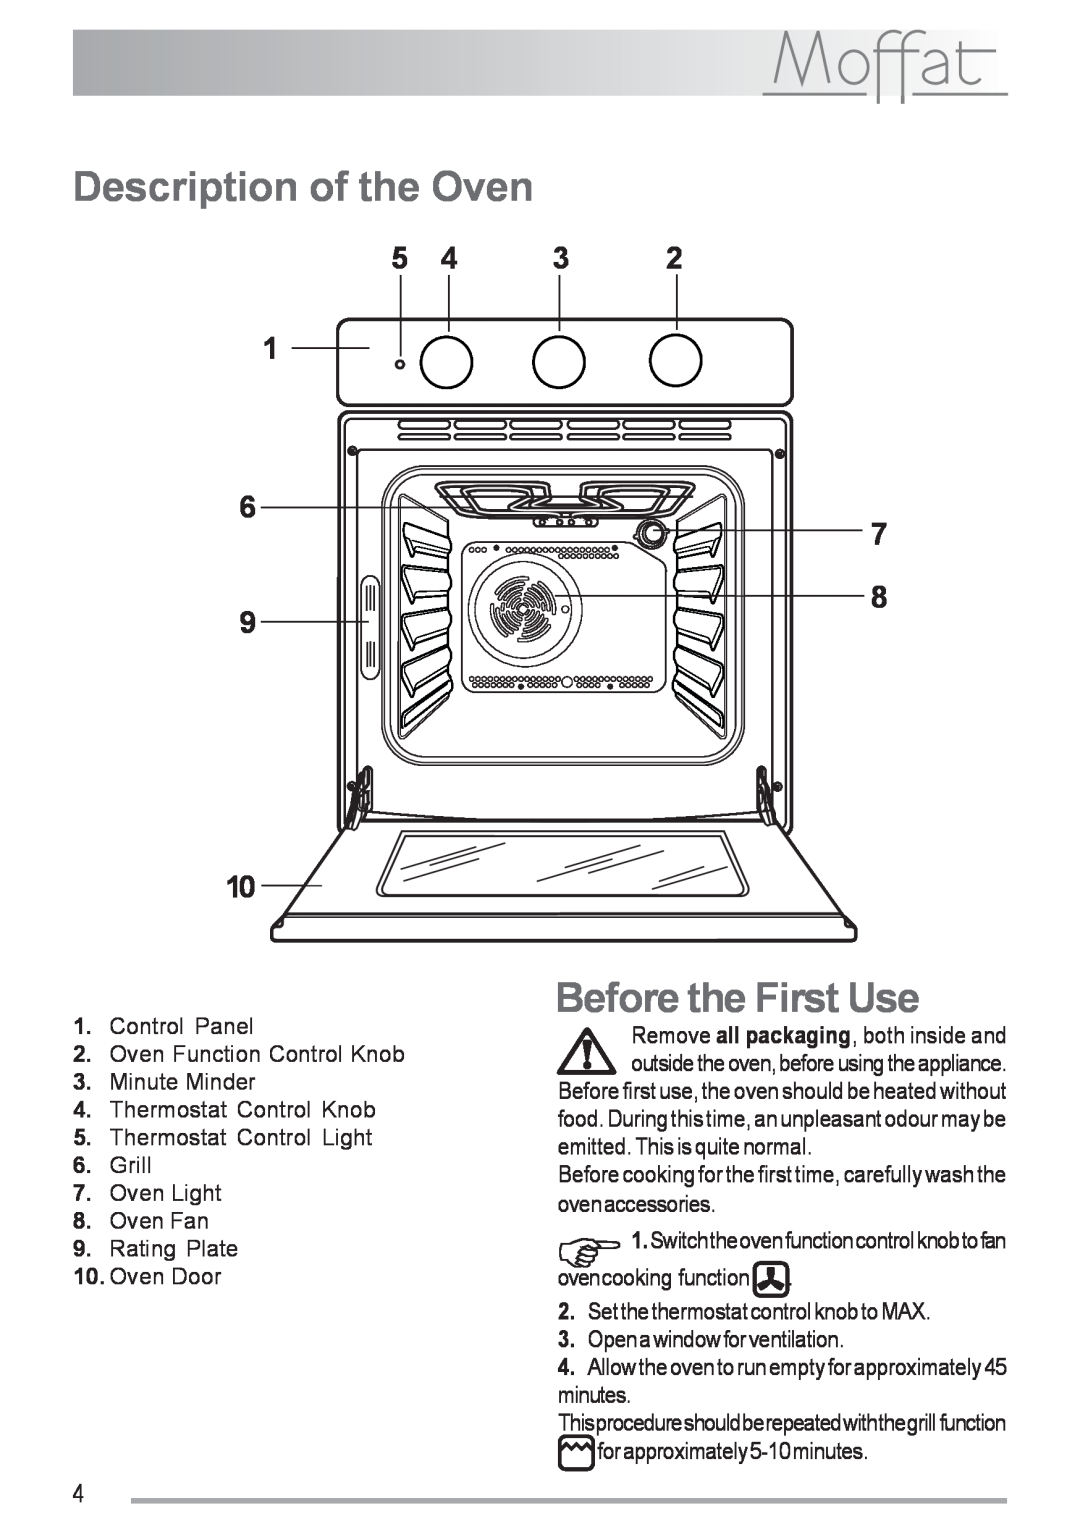 Moffat MSF 611 manual Description of the Oven, Before the First Use, 5 1 6 9 